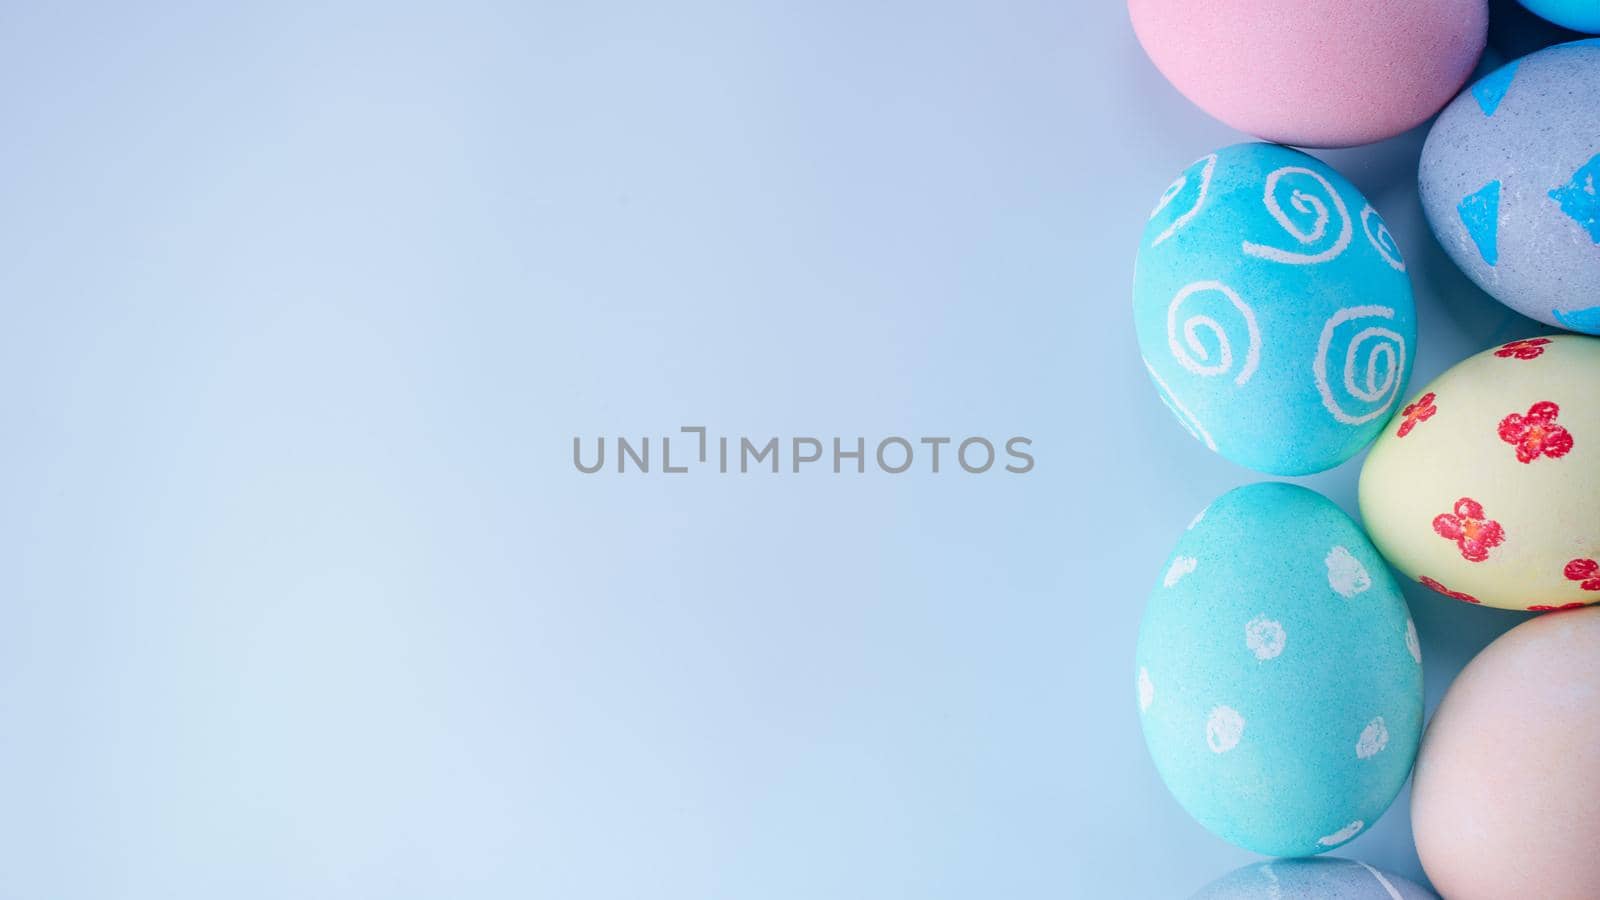 Colorful Easter eggs dyed by colored water with beautiful pattern on a pale blue background, design concept of holiday activity, top view, copy space.